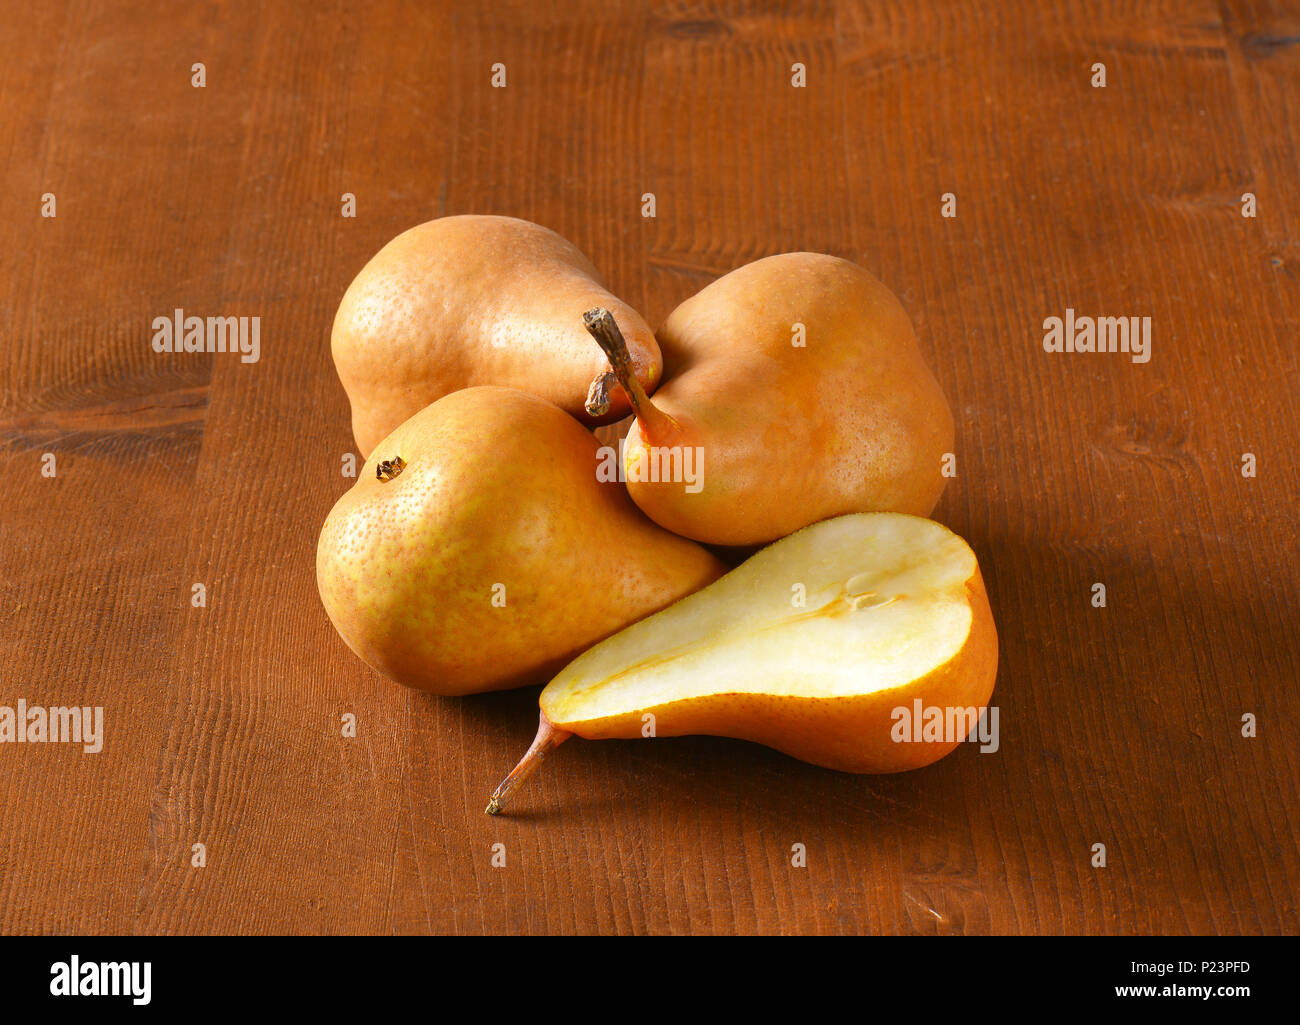 ripe bosc pears on wooden table Stock Photo